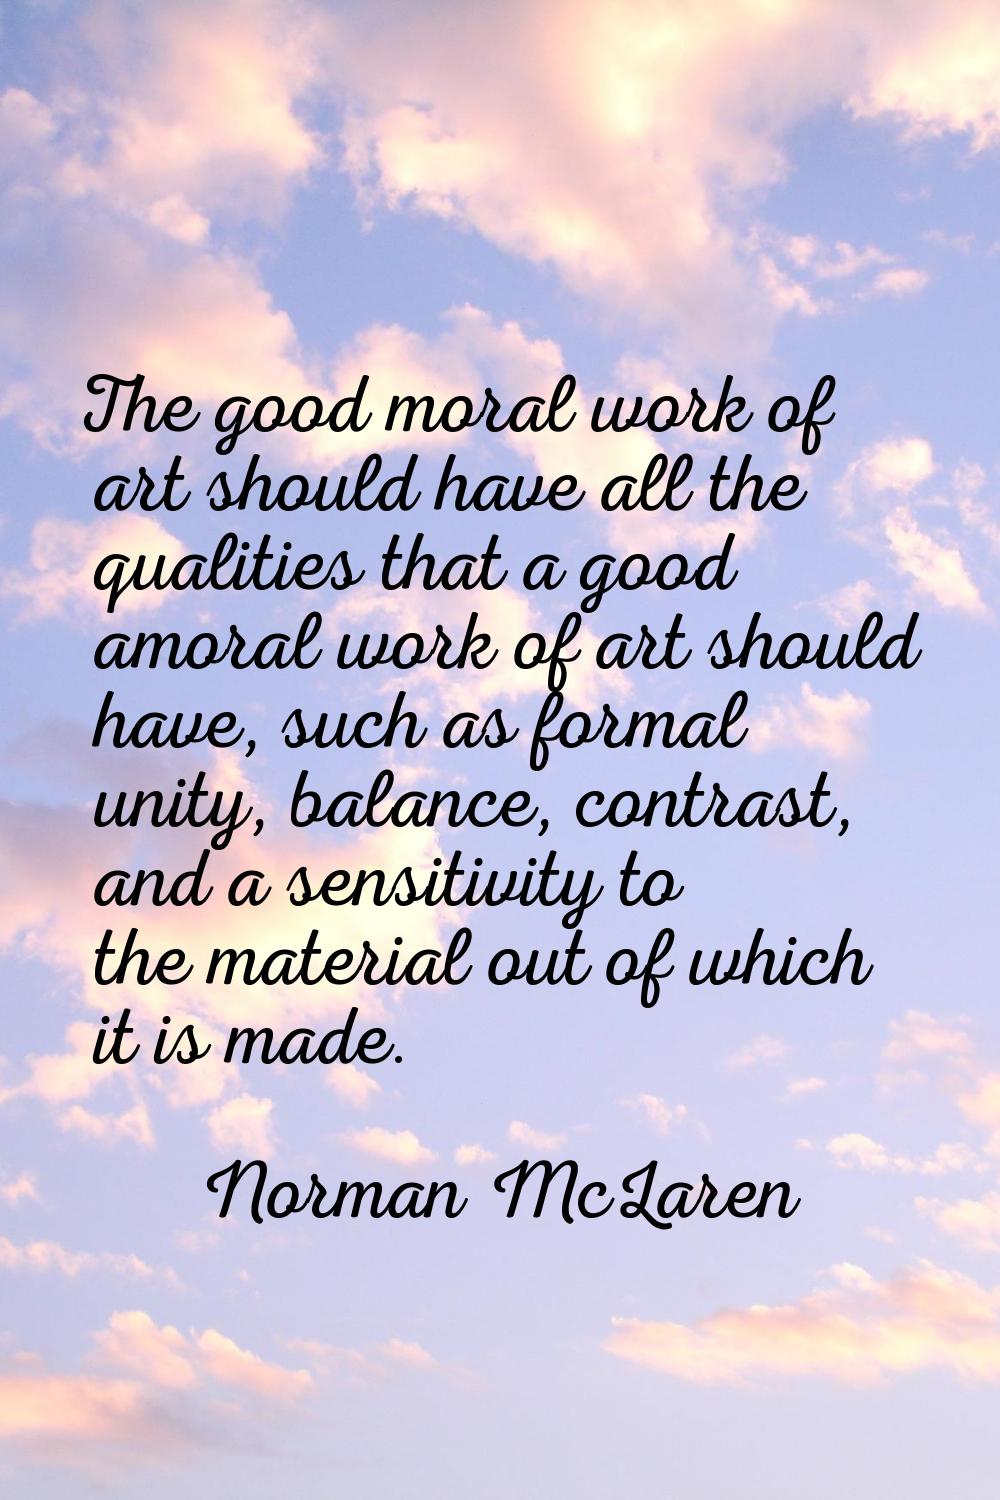 The good moral work of art should have all the qualities that a good amoral work of art should have